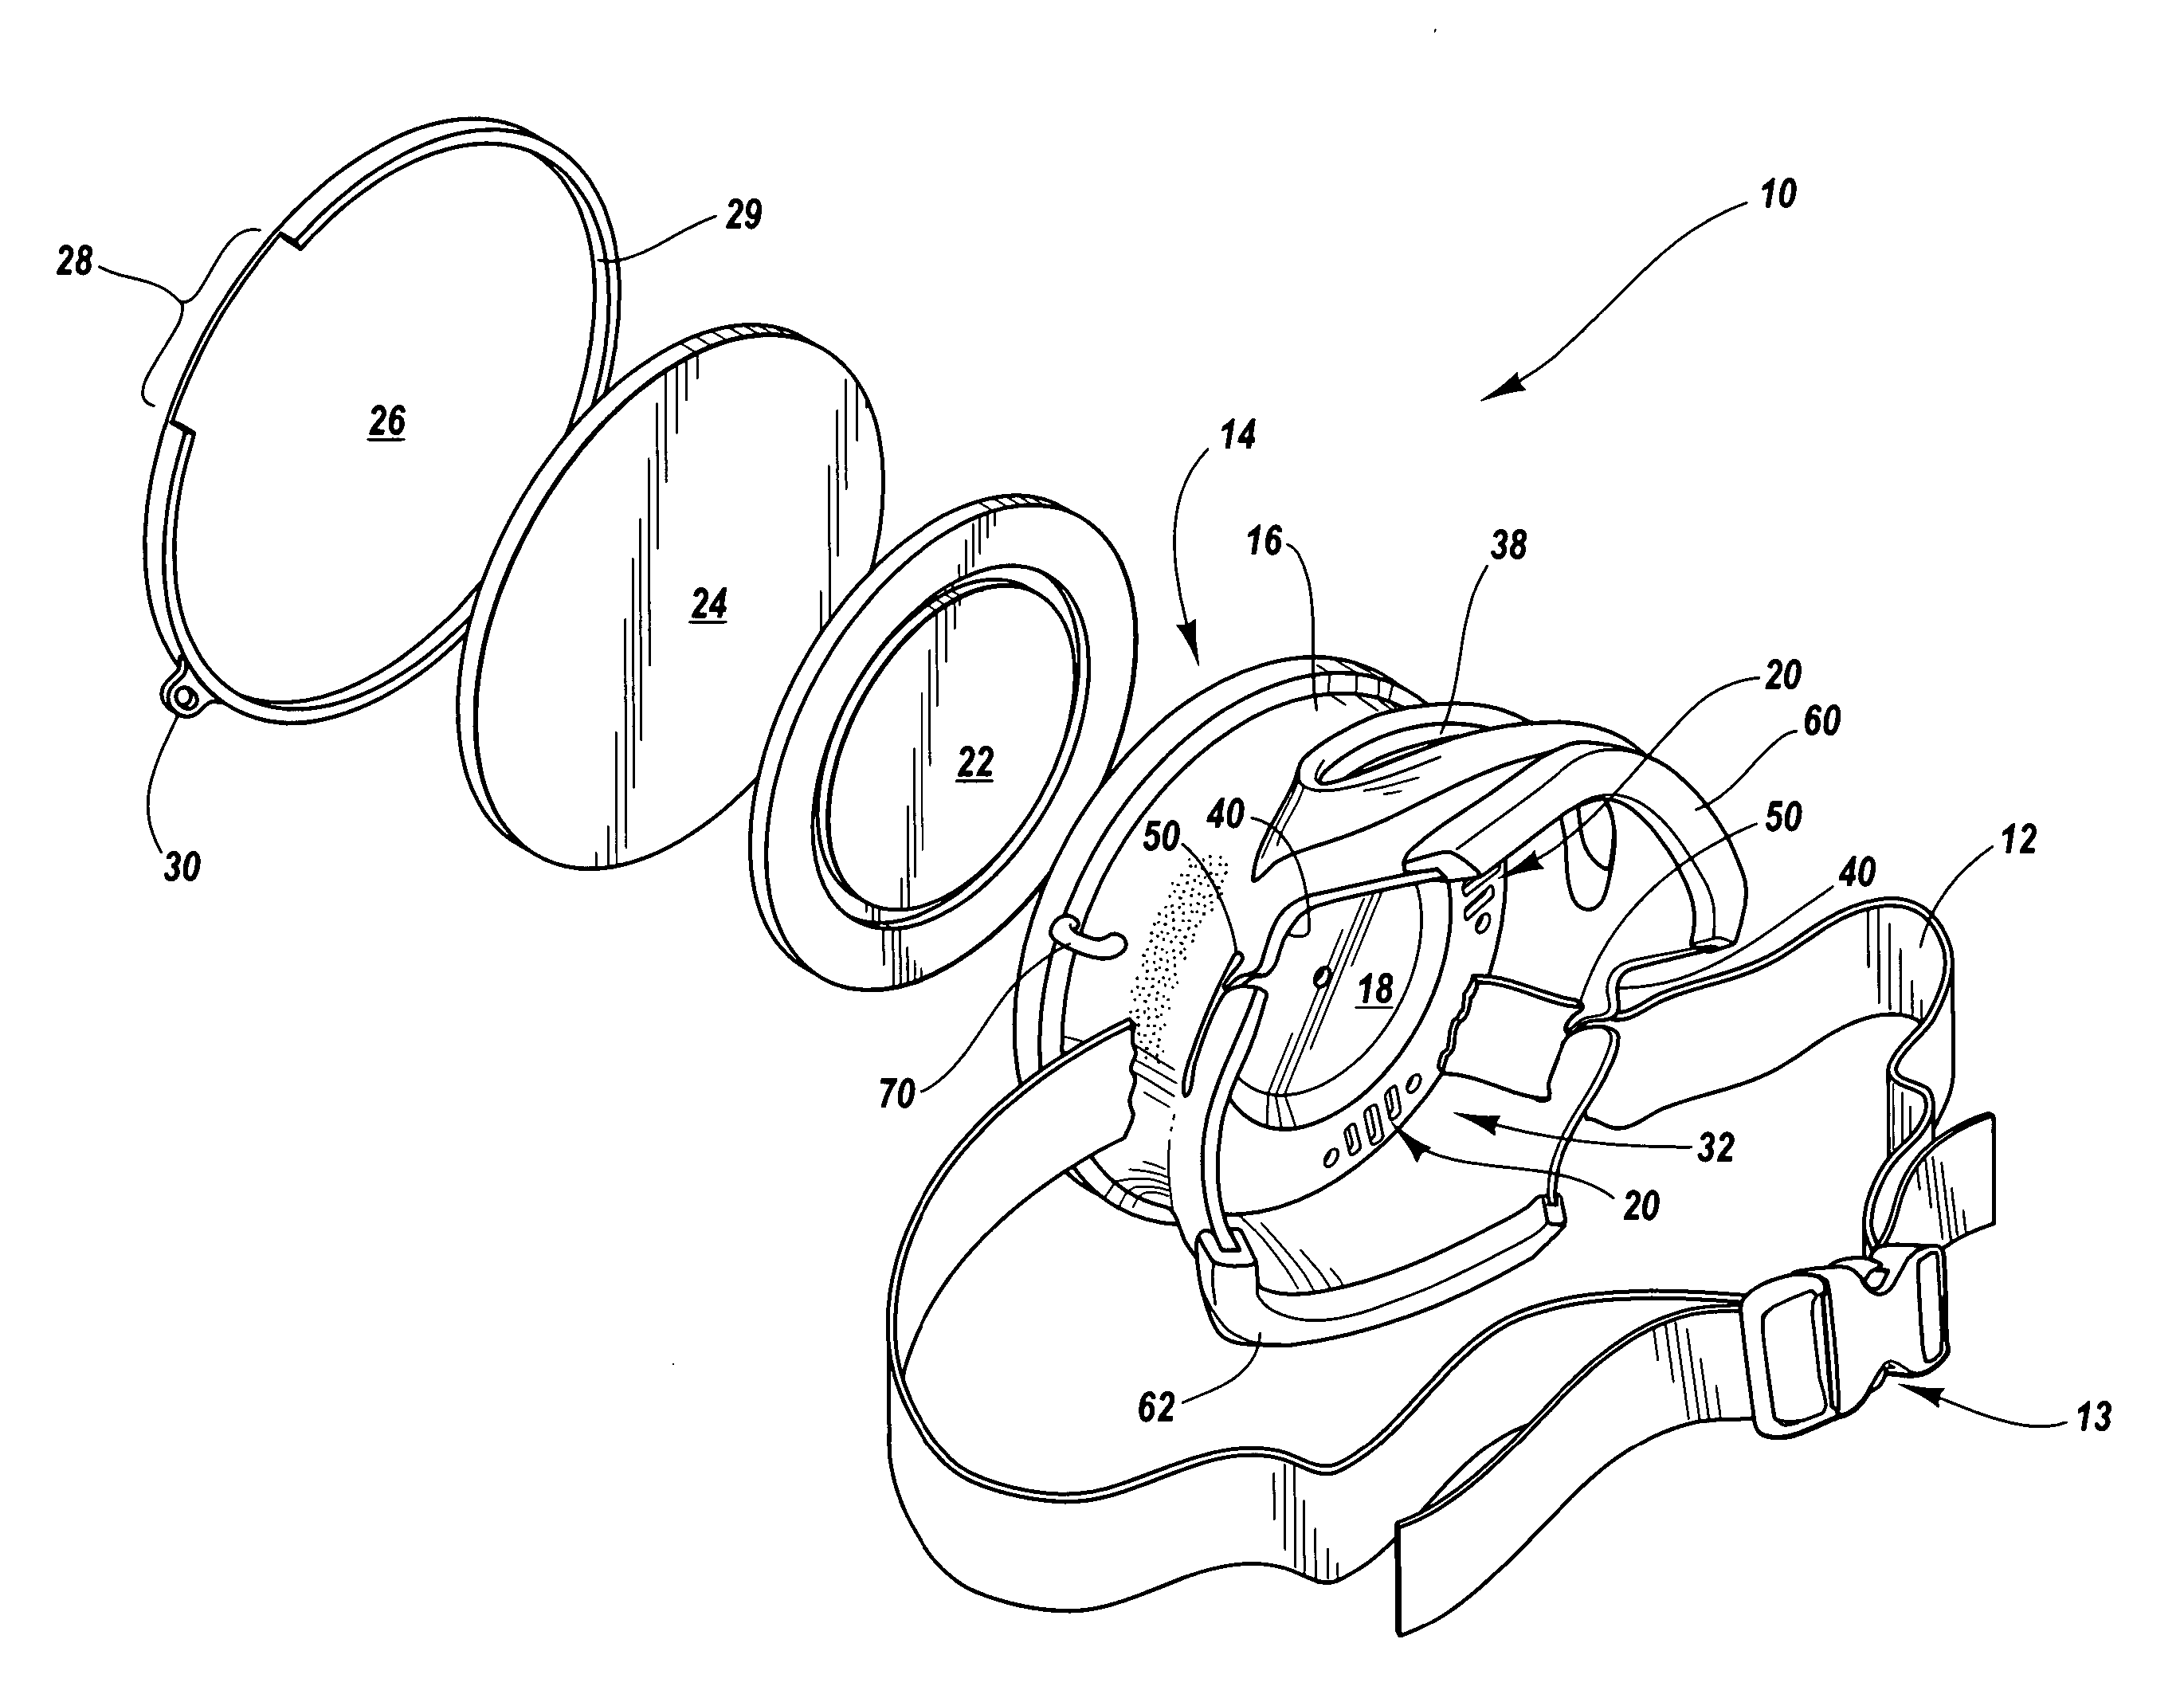 Friction game call apparatus with external sound chamber